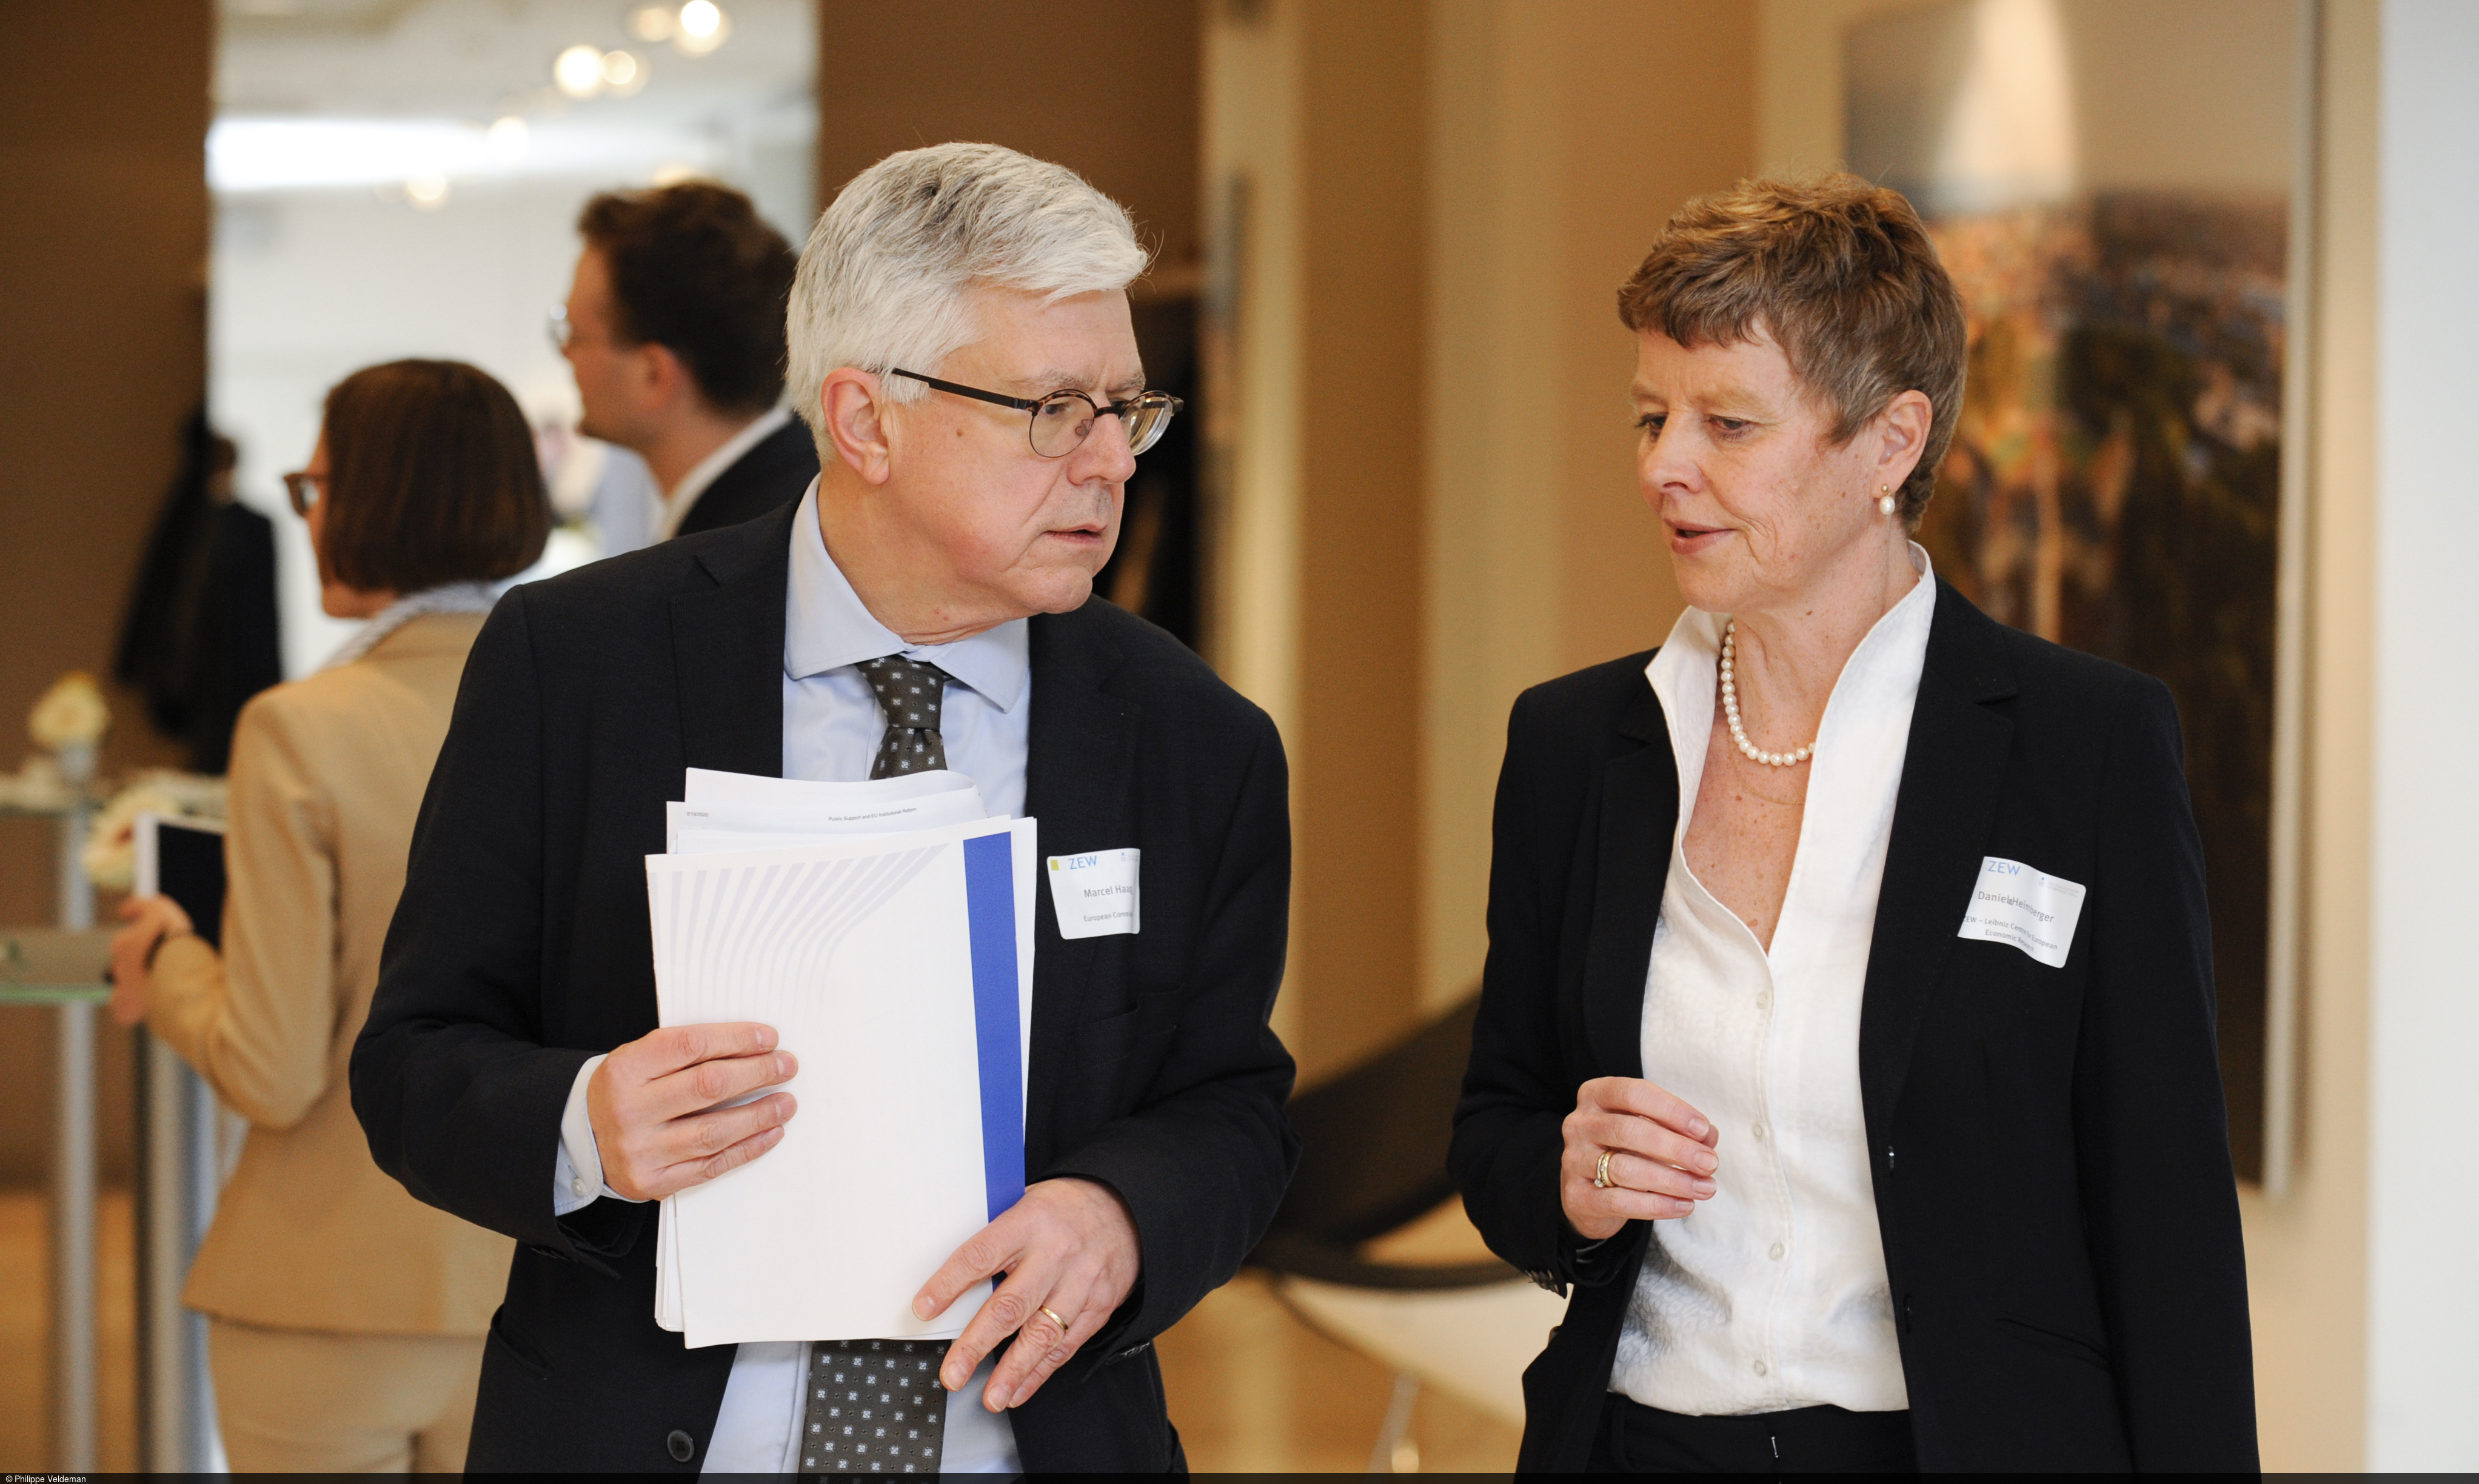 Marcel Haag from the European Commission in conversation with Dr. Daniela Heimberger, head of the ZEW Service Department “International Co-operation and Public Relations”.